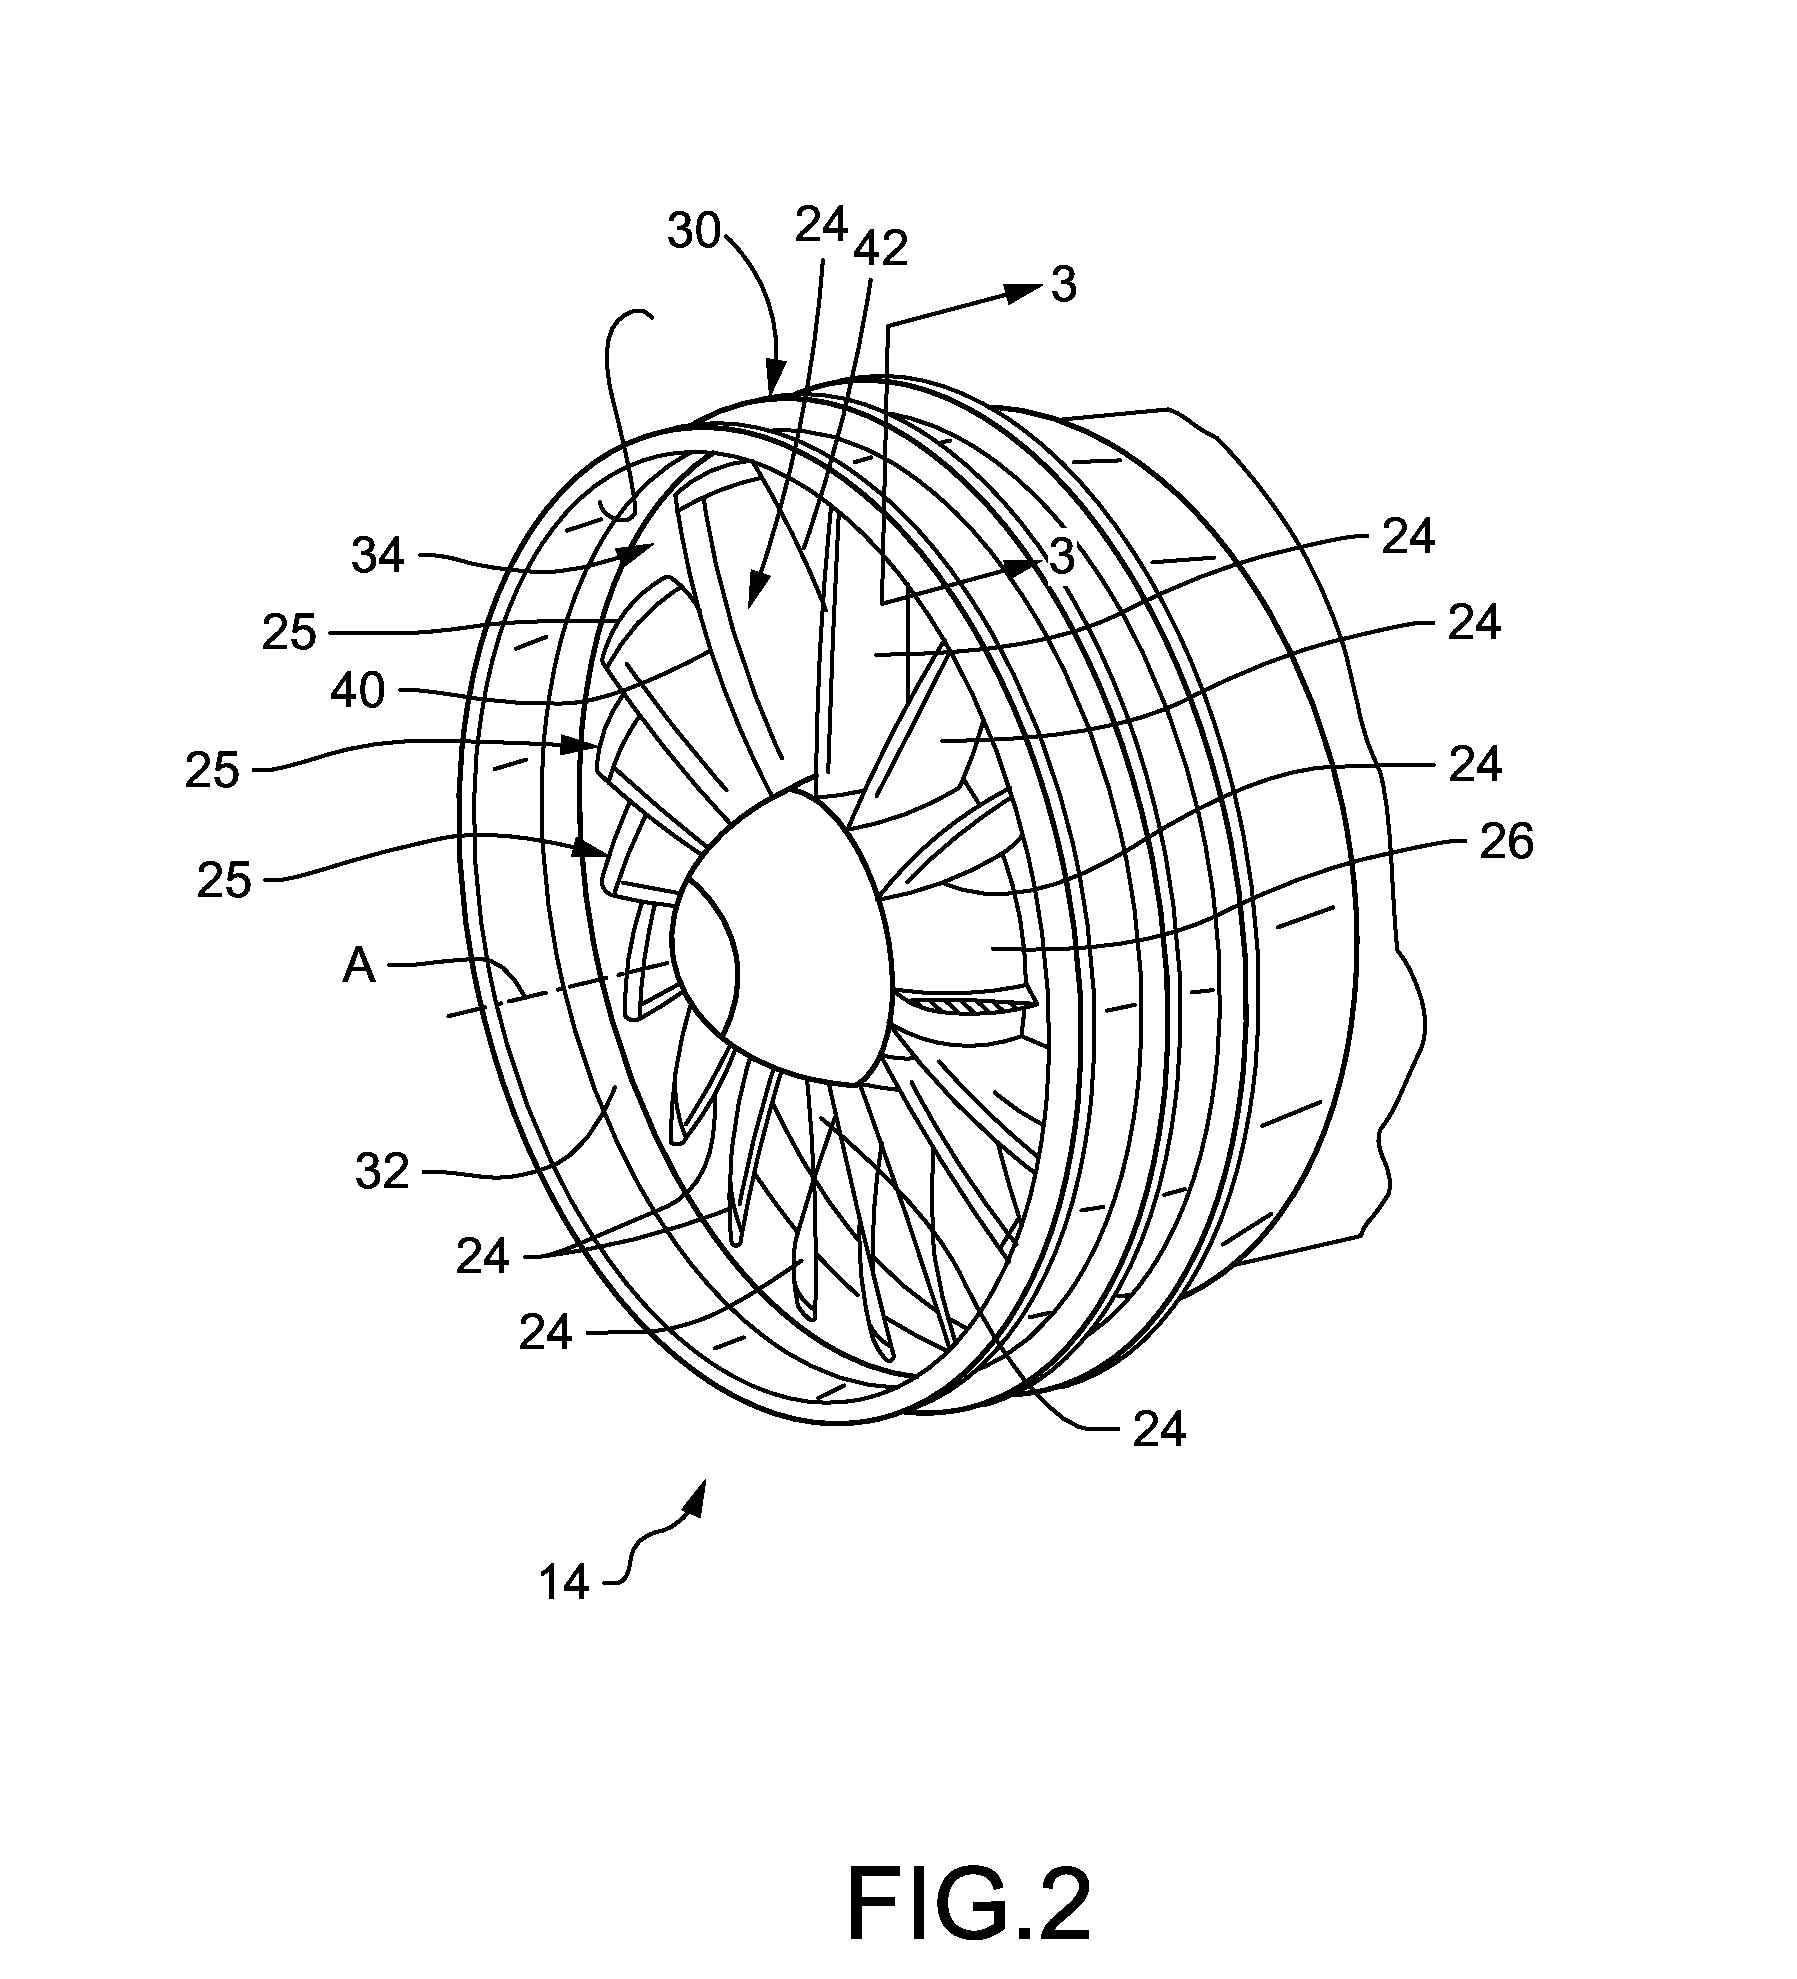 Method of forming an abrasive coating on a fan blade tip